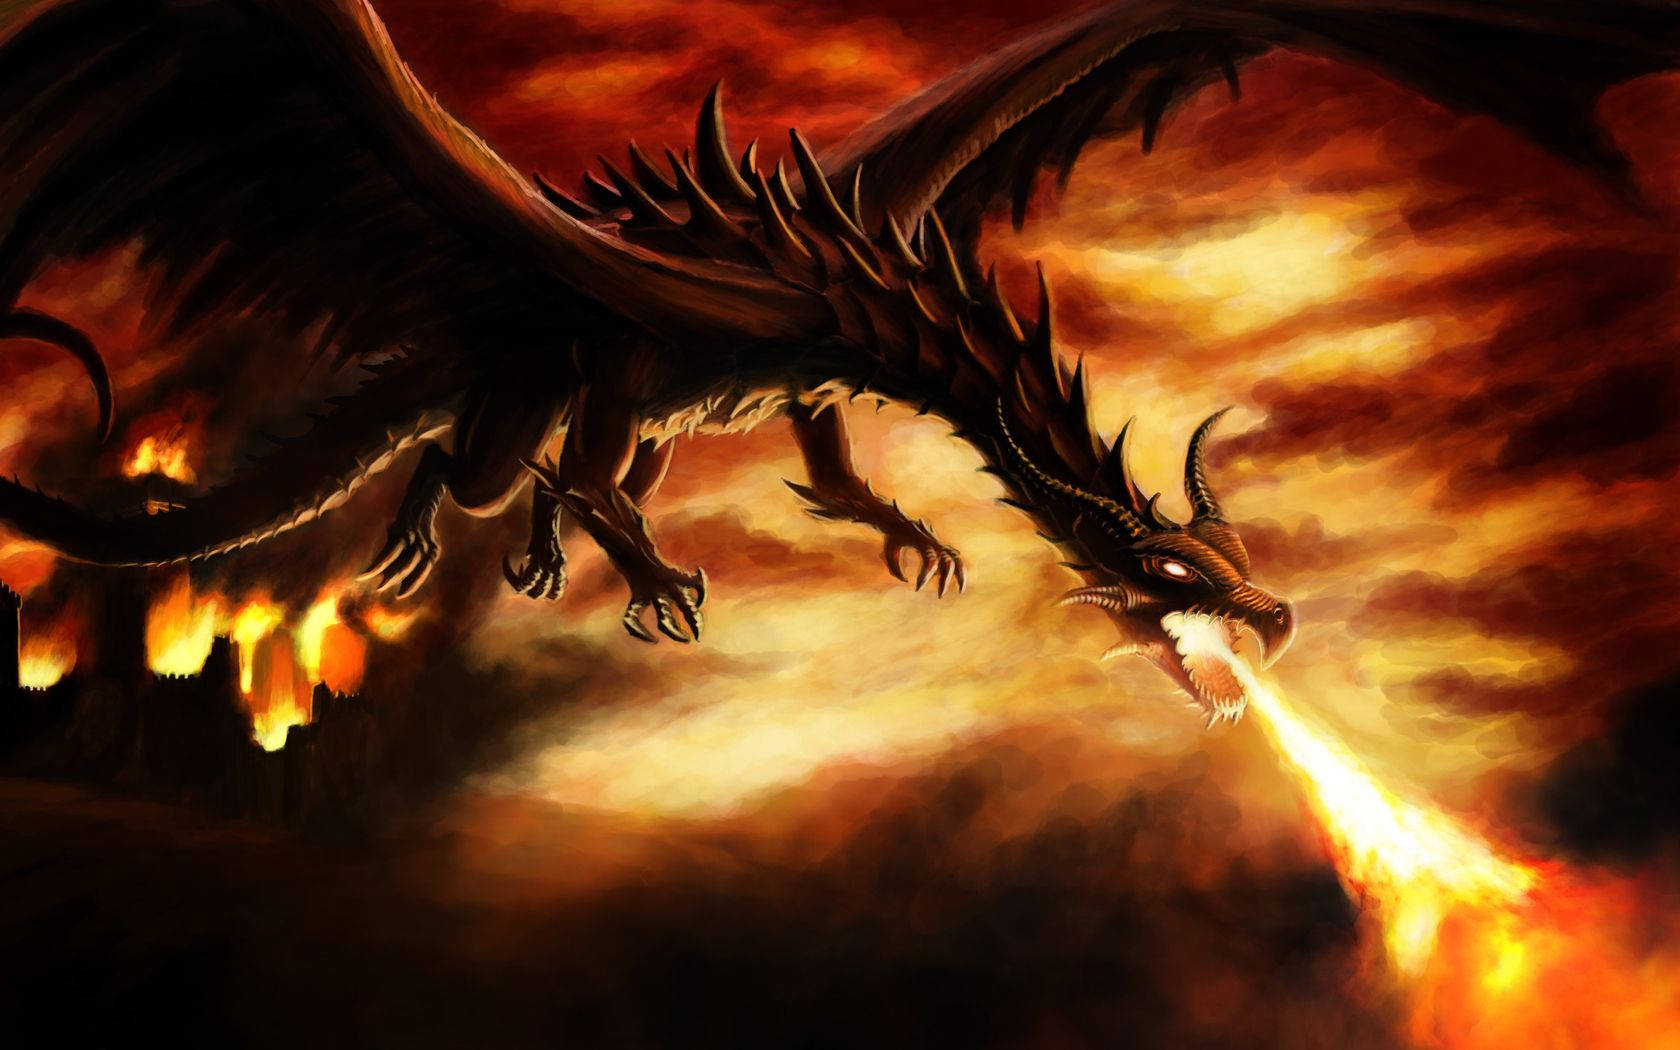 Fire Dragon With Sharp Spines Wallpaper